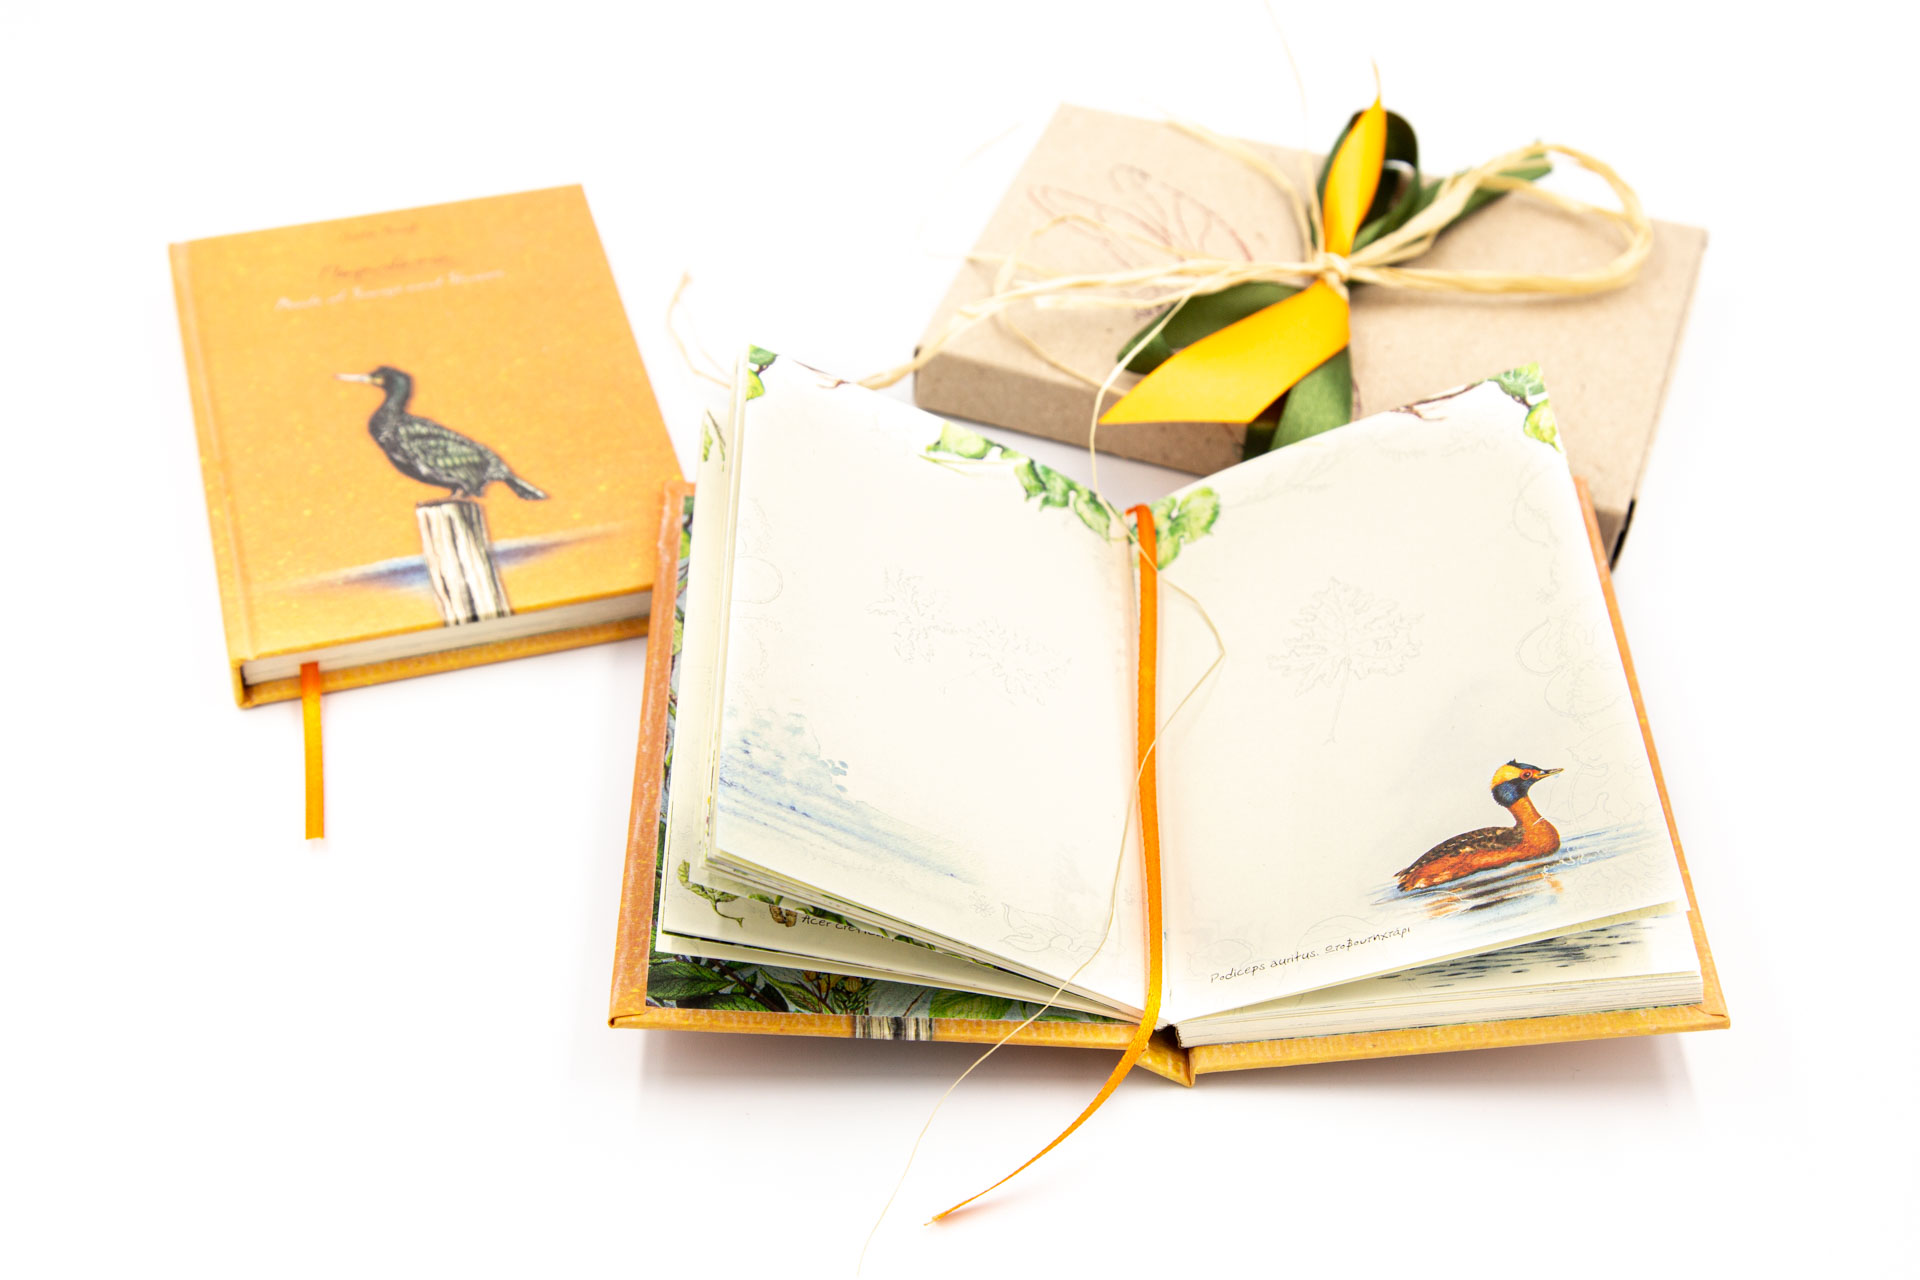 Small notebook "Birds of Songs and Shores" - Range